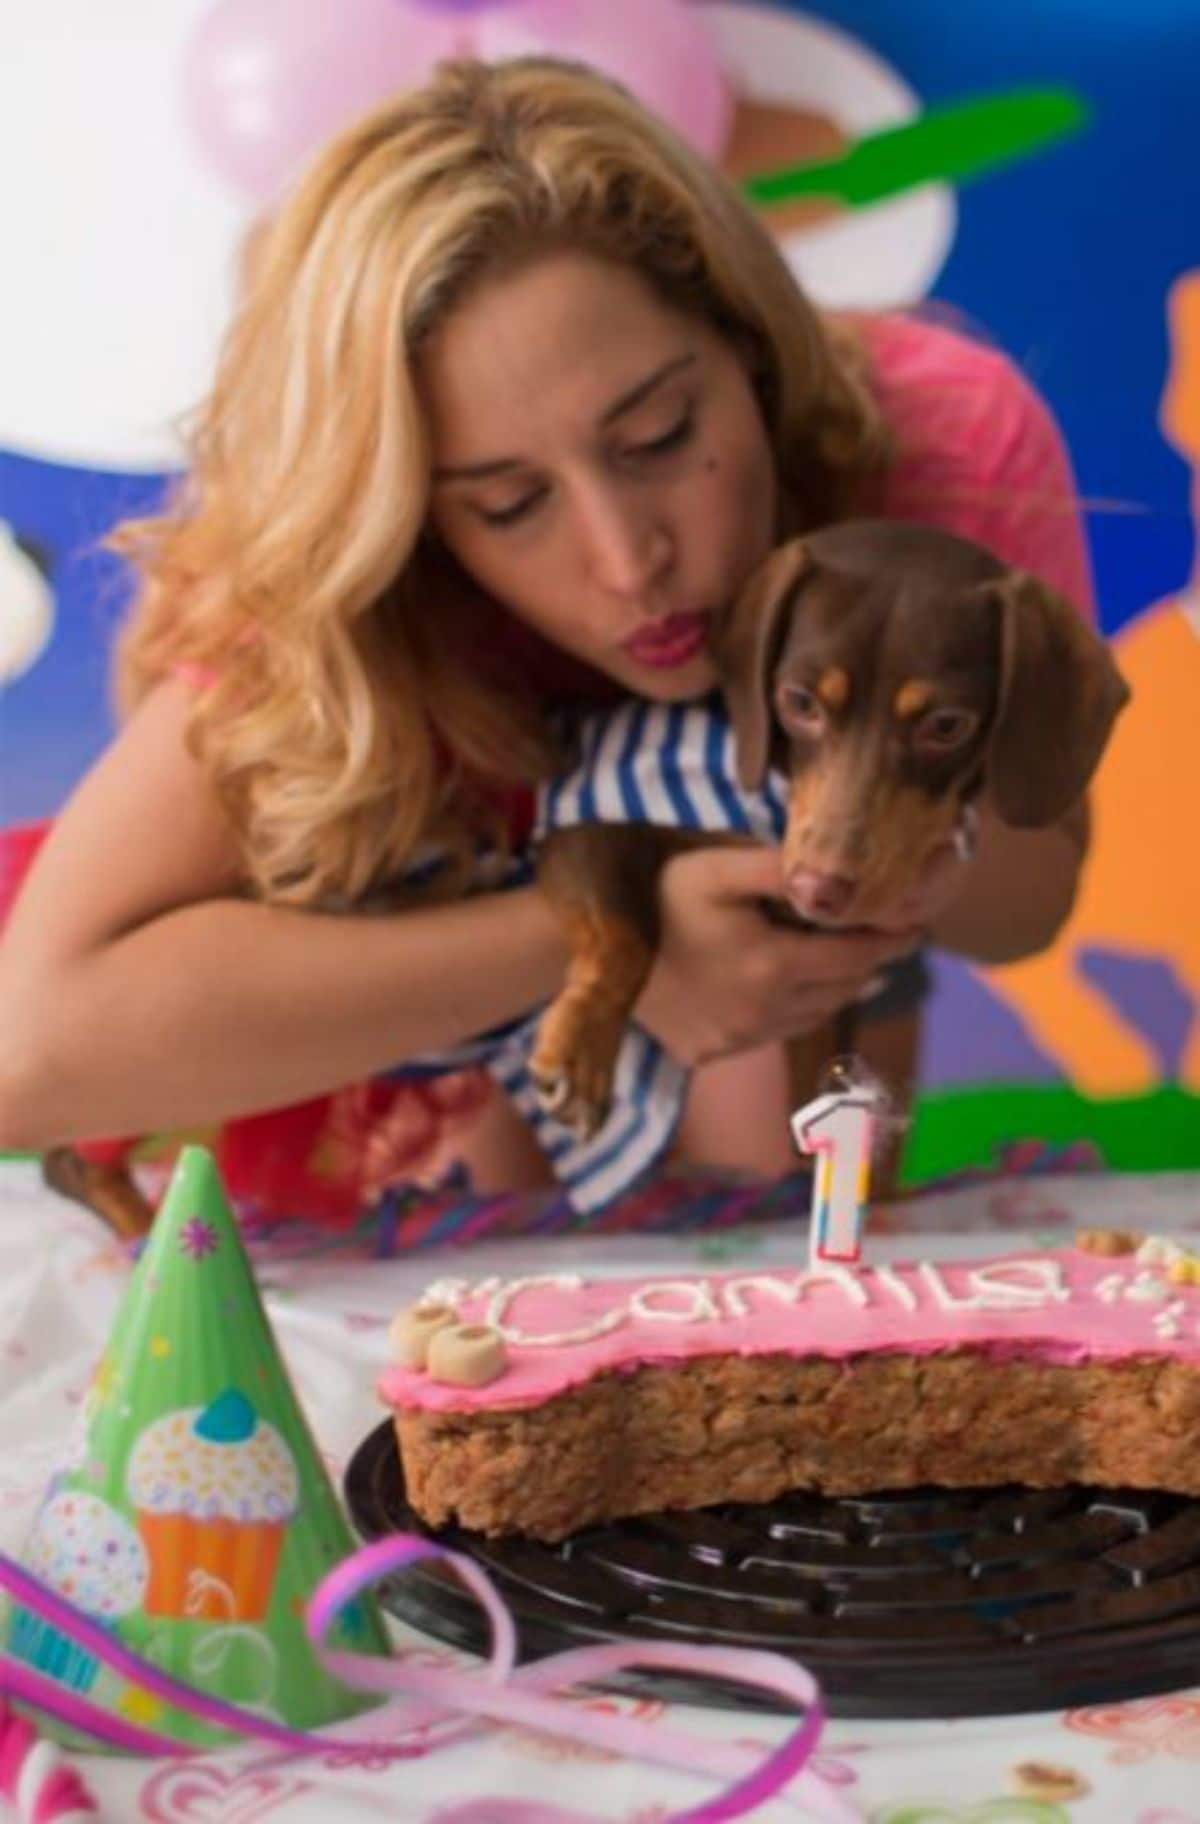 brown dachshund being held by a woman in front of a pink and brown cake with a 1 candle on it